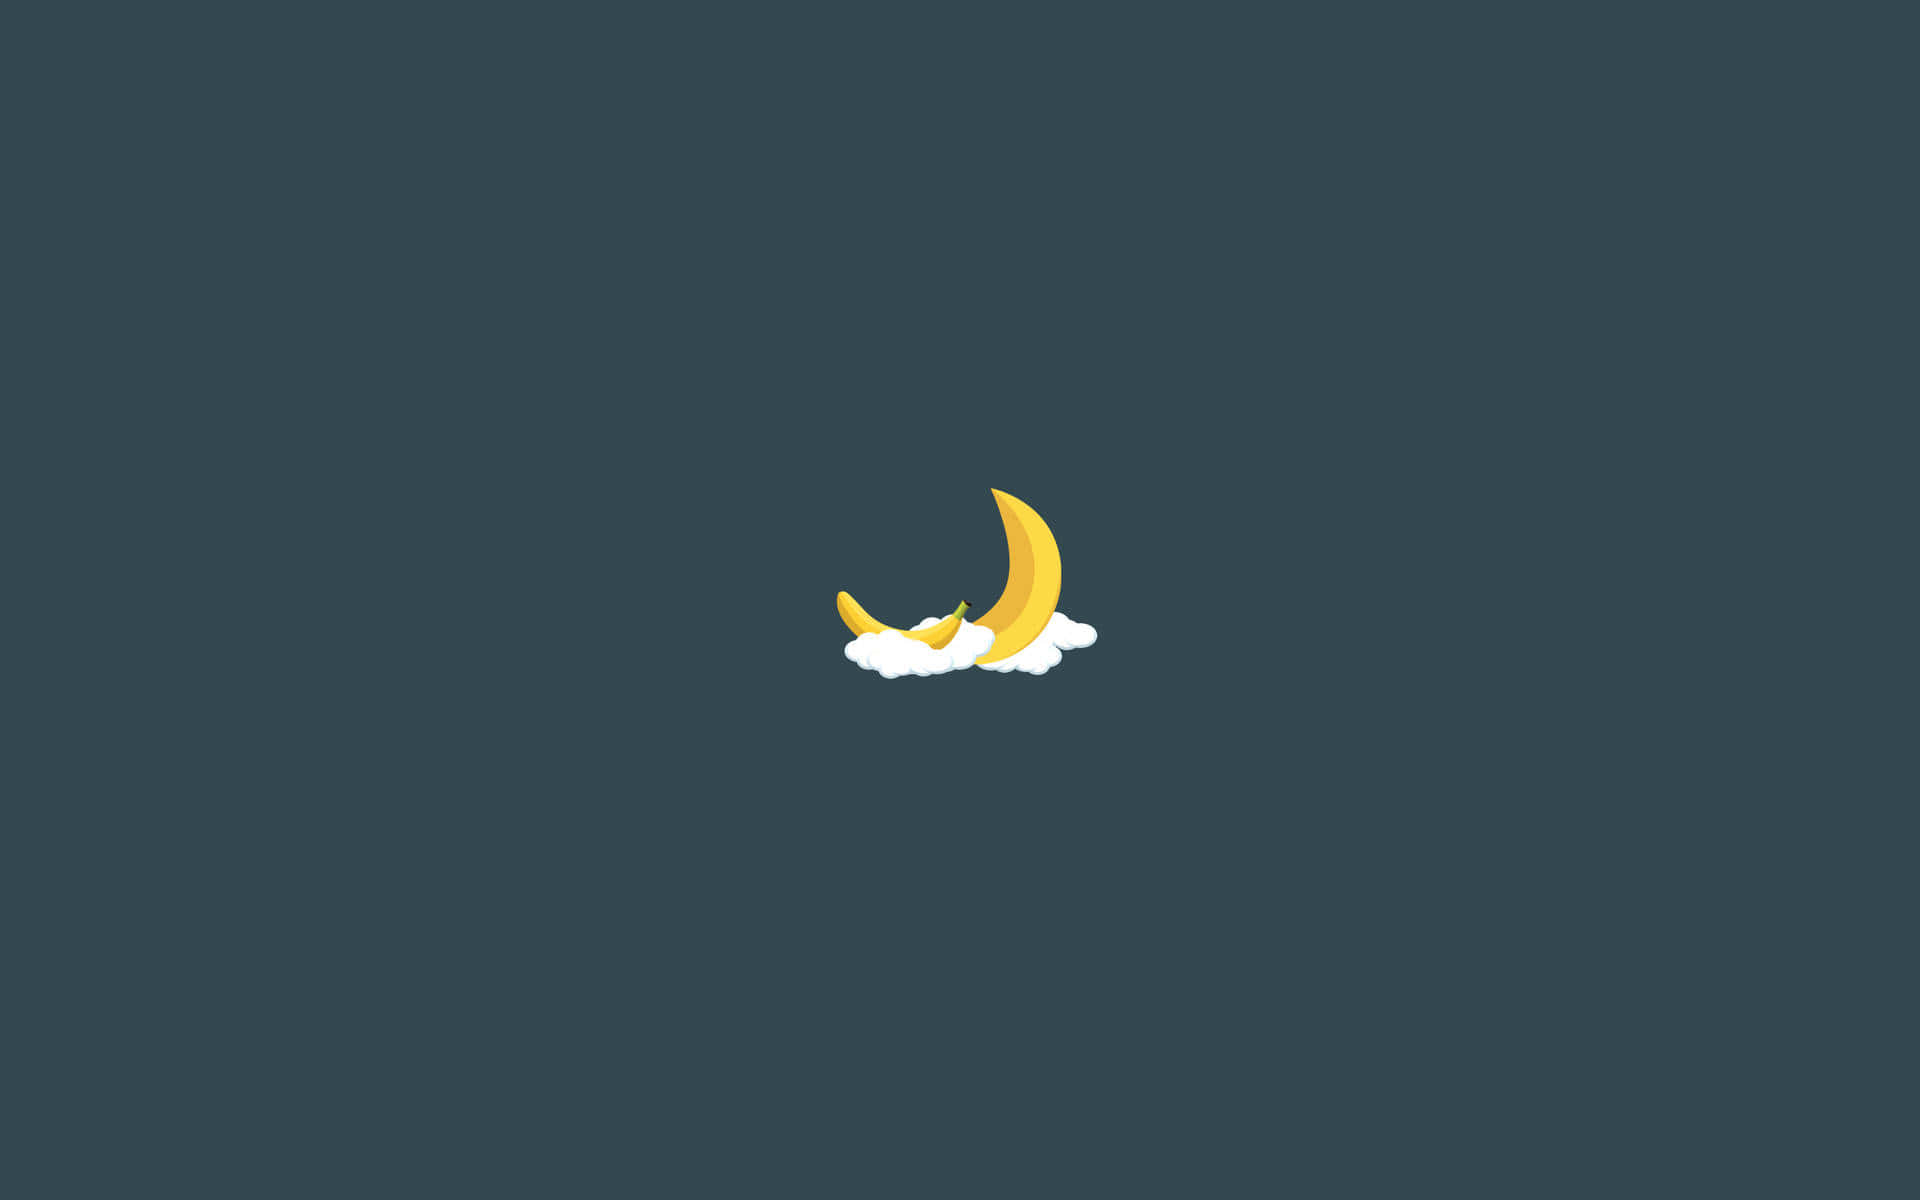 Banana And Crescent Moon Minimal Background Picture